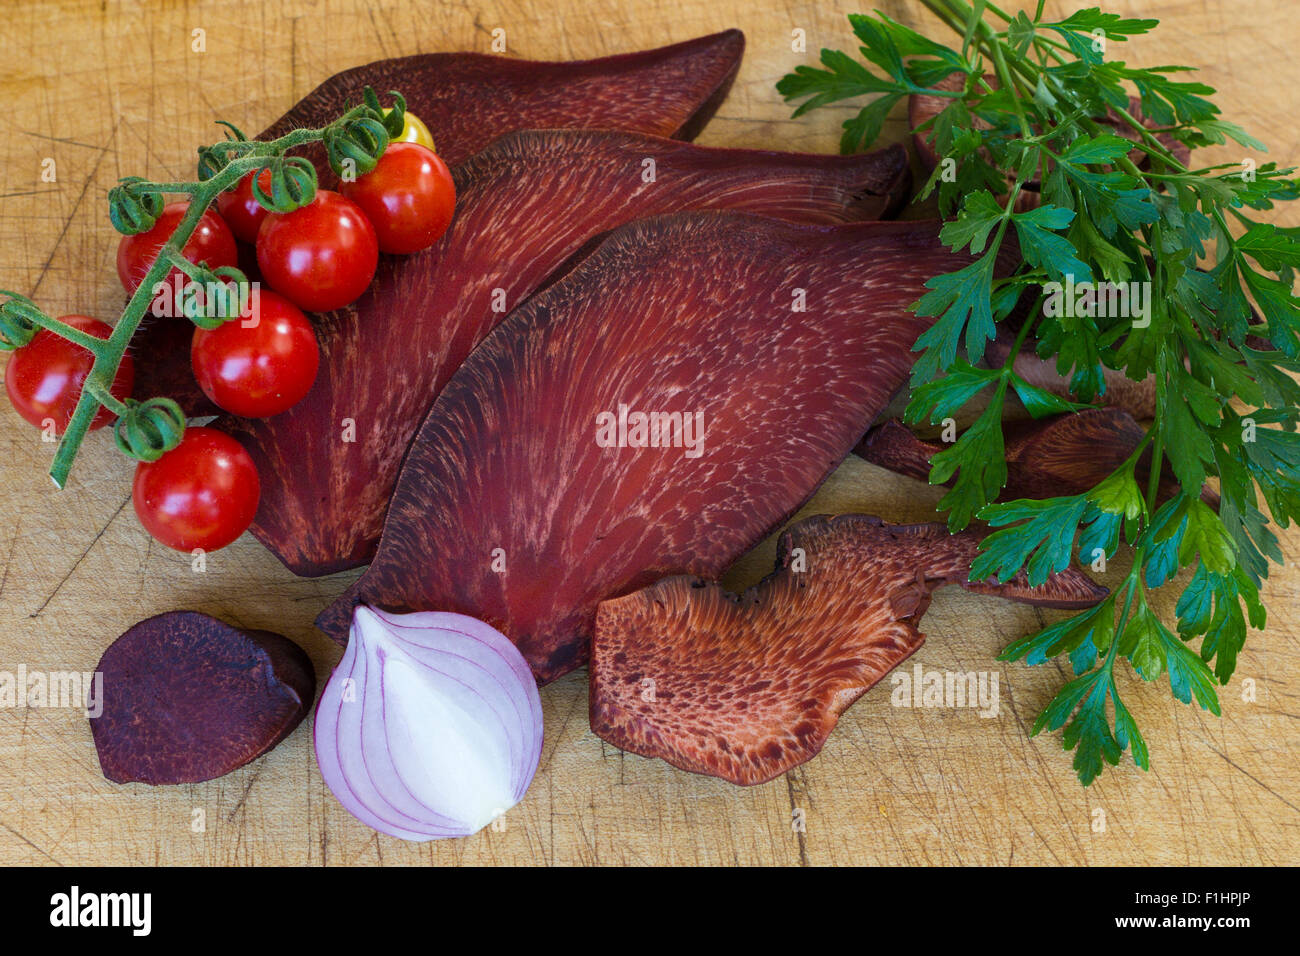 Pick wood with slices of liver Fistula Needles(fistulina hepatica or Beefsteak Fungus ), red onion, cherry tomatoes and parsley Stock Photo